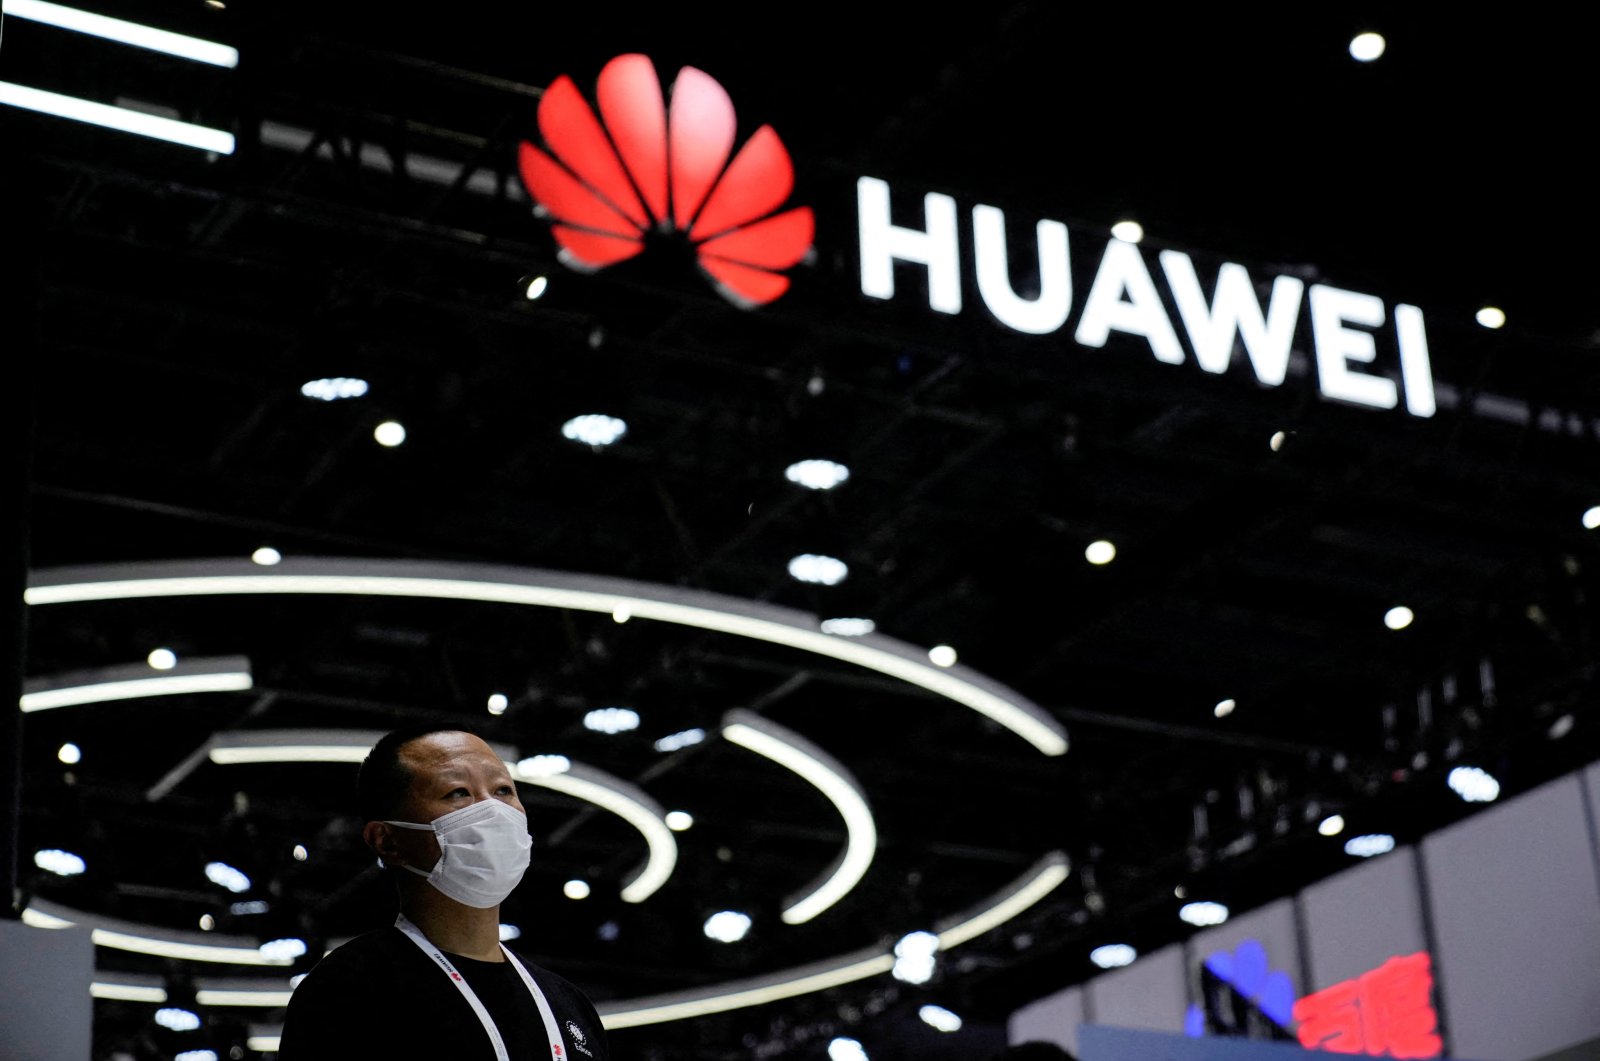 A person stands by a sign of Huawei during World Artificial Intelligence Conference, following the COVID-19 outbreak, in Shanghai, China, Sept. 1, 2022. (Reuters Photo)